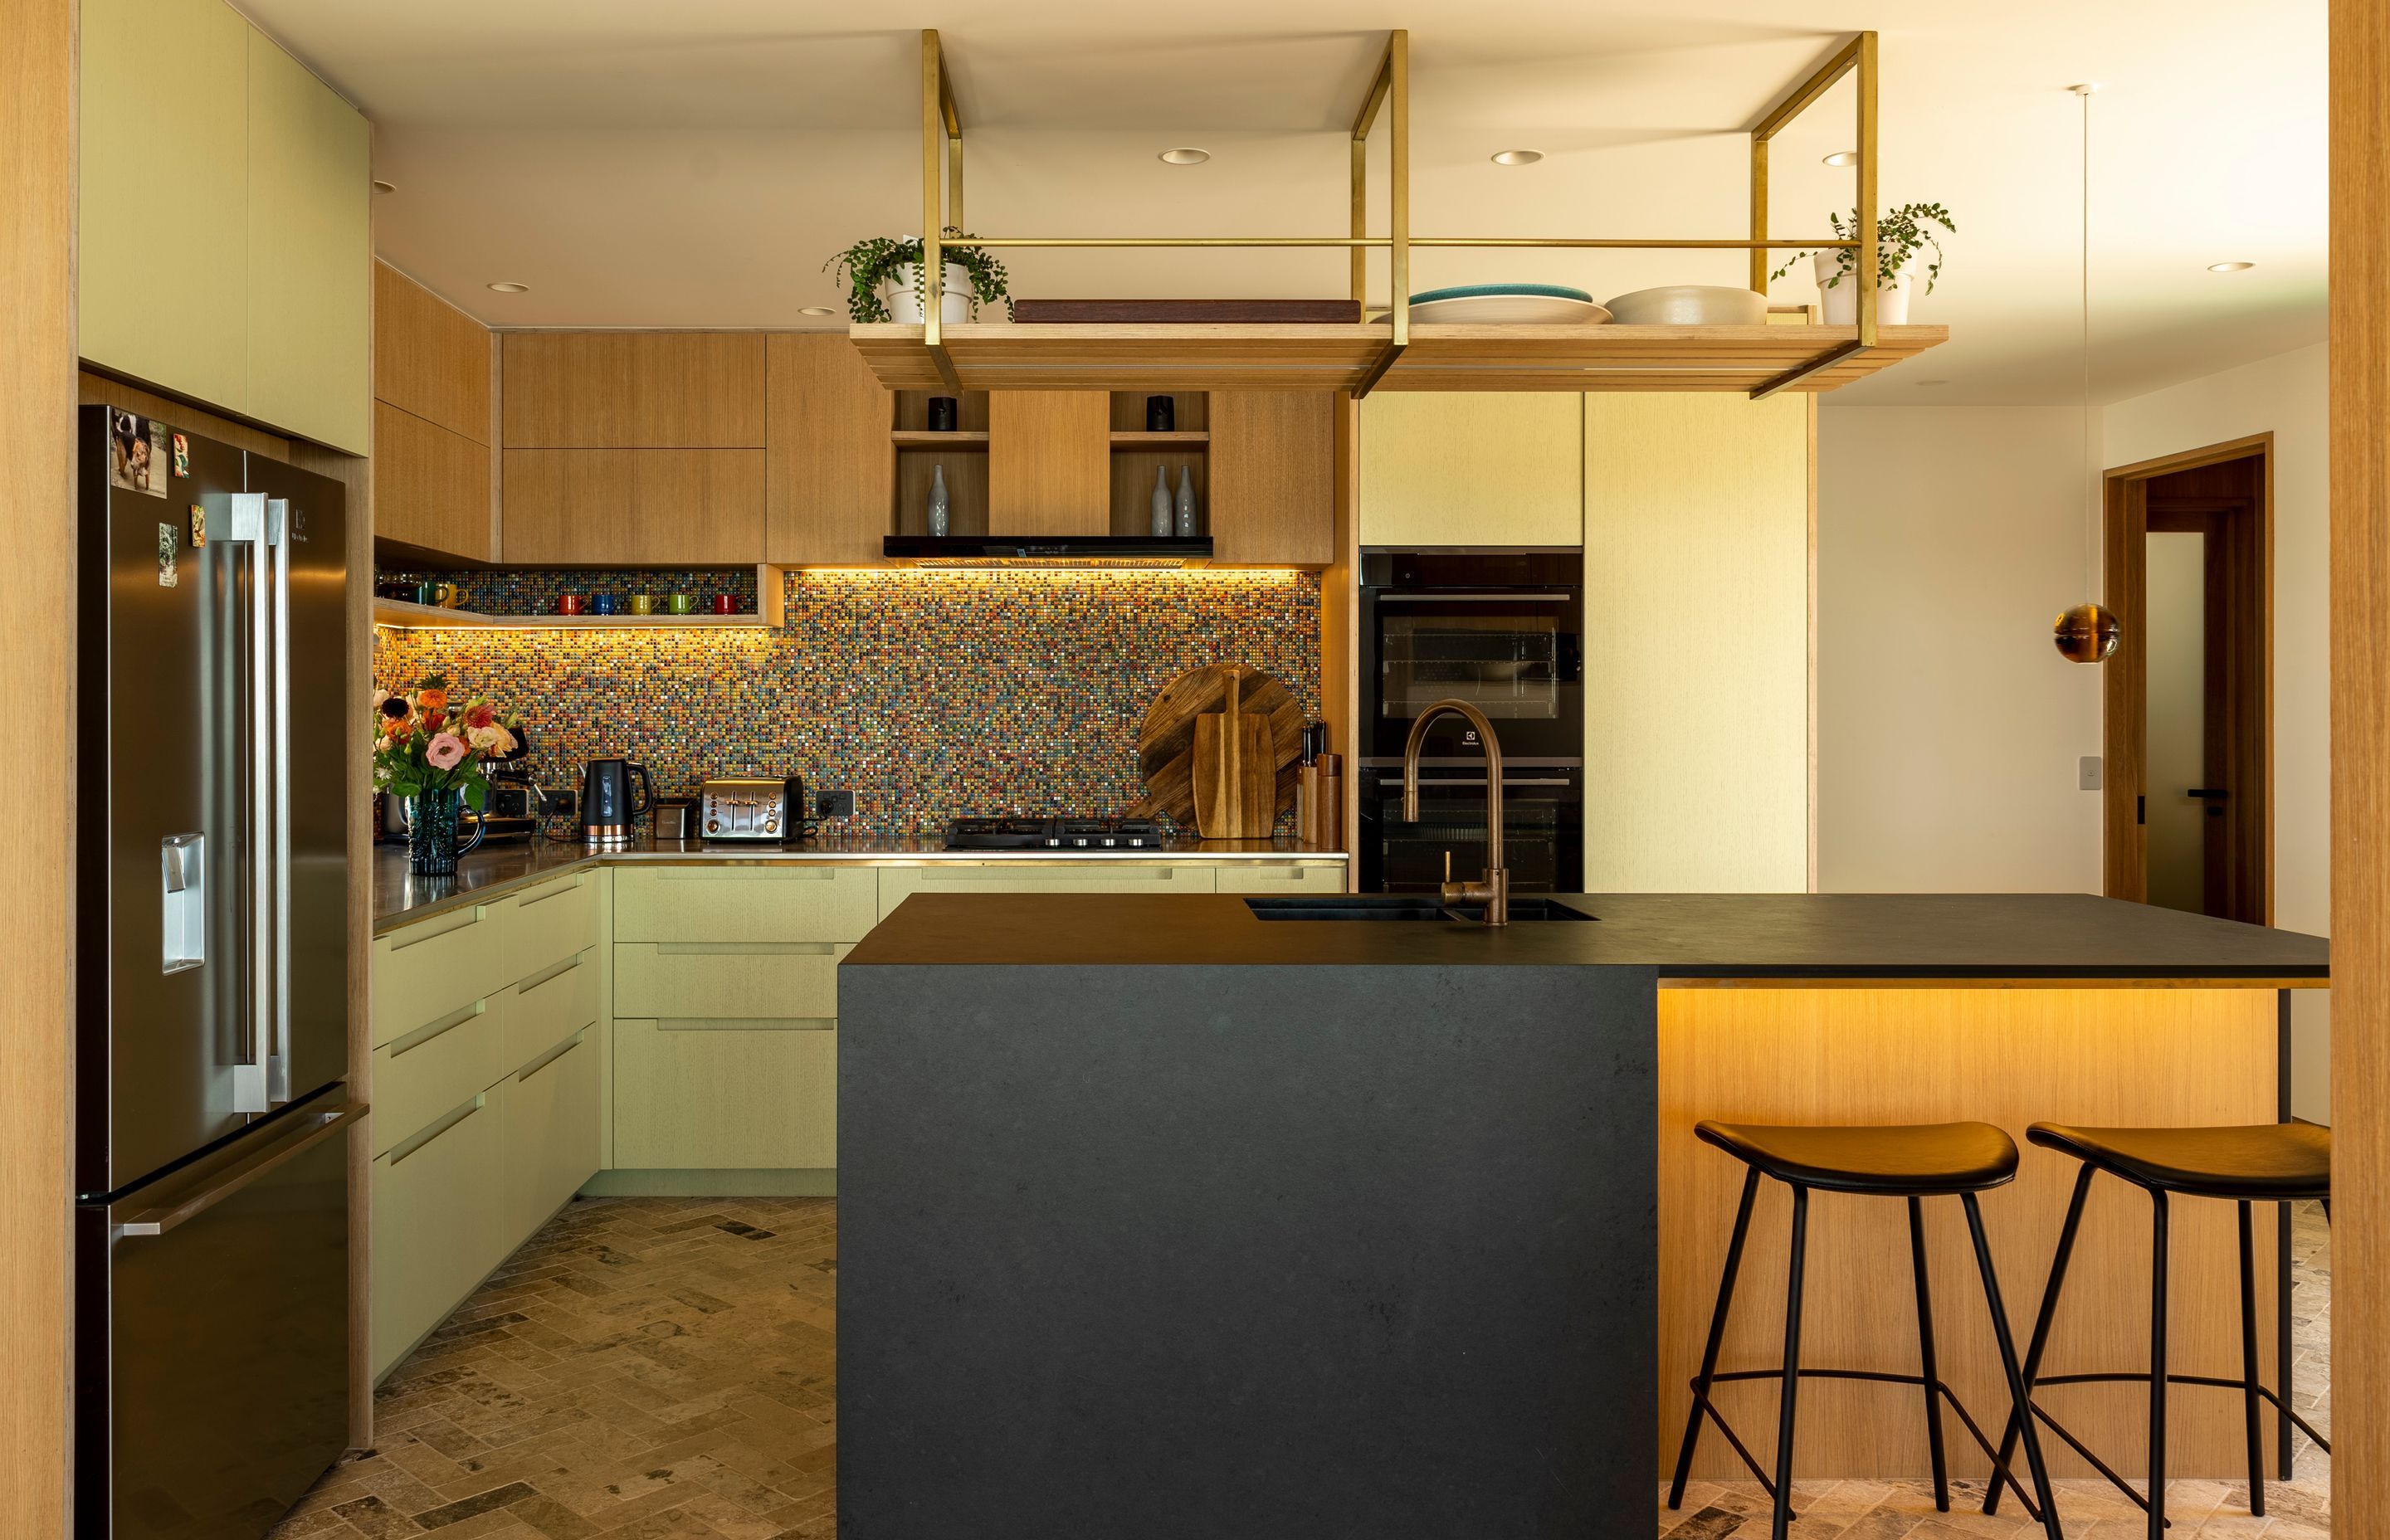 A colourful kitchen splashback and green oak cabinetry feature in the kitchen.